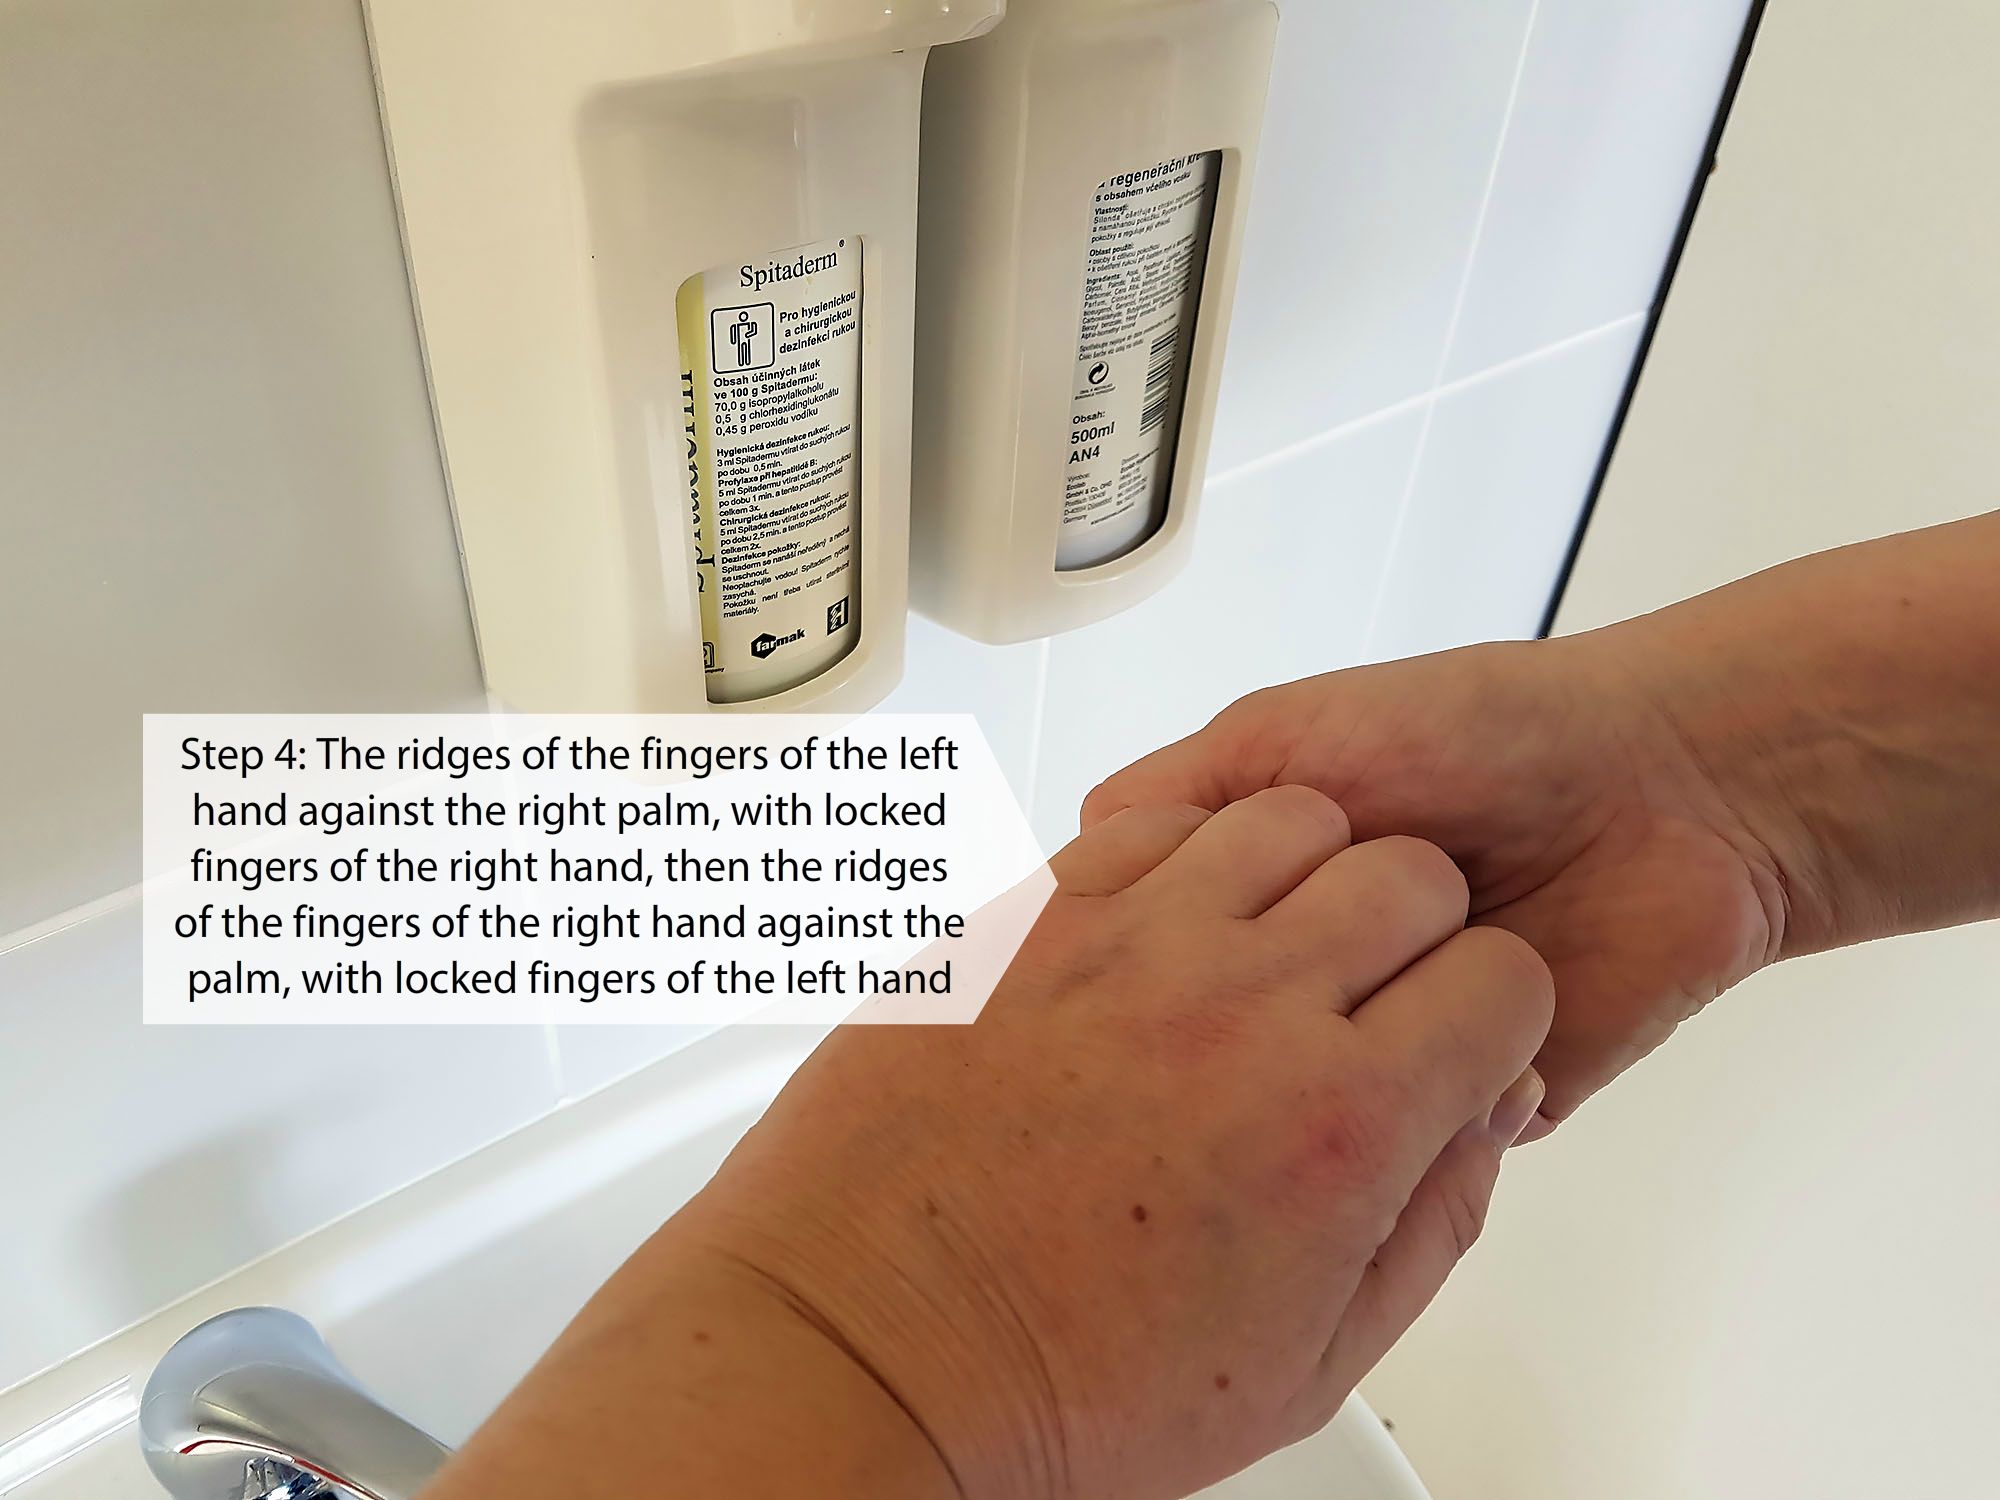 Procedure for rubbing the disinfectant solution during hygienic hand disinfection (Step 4)